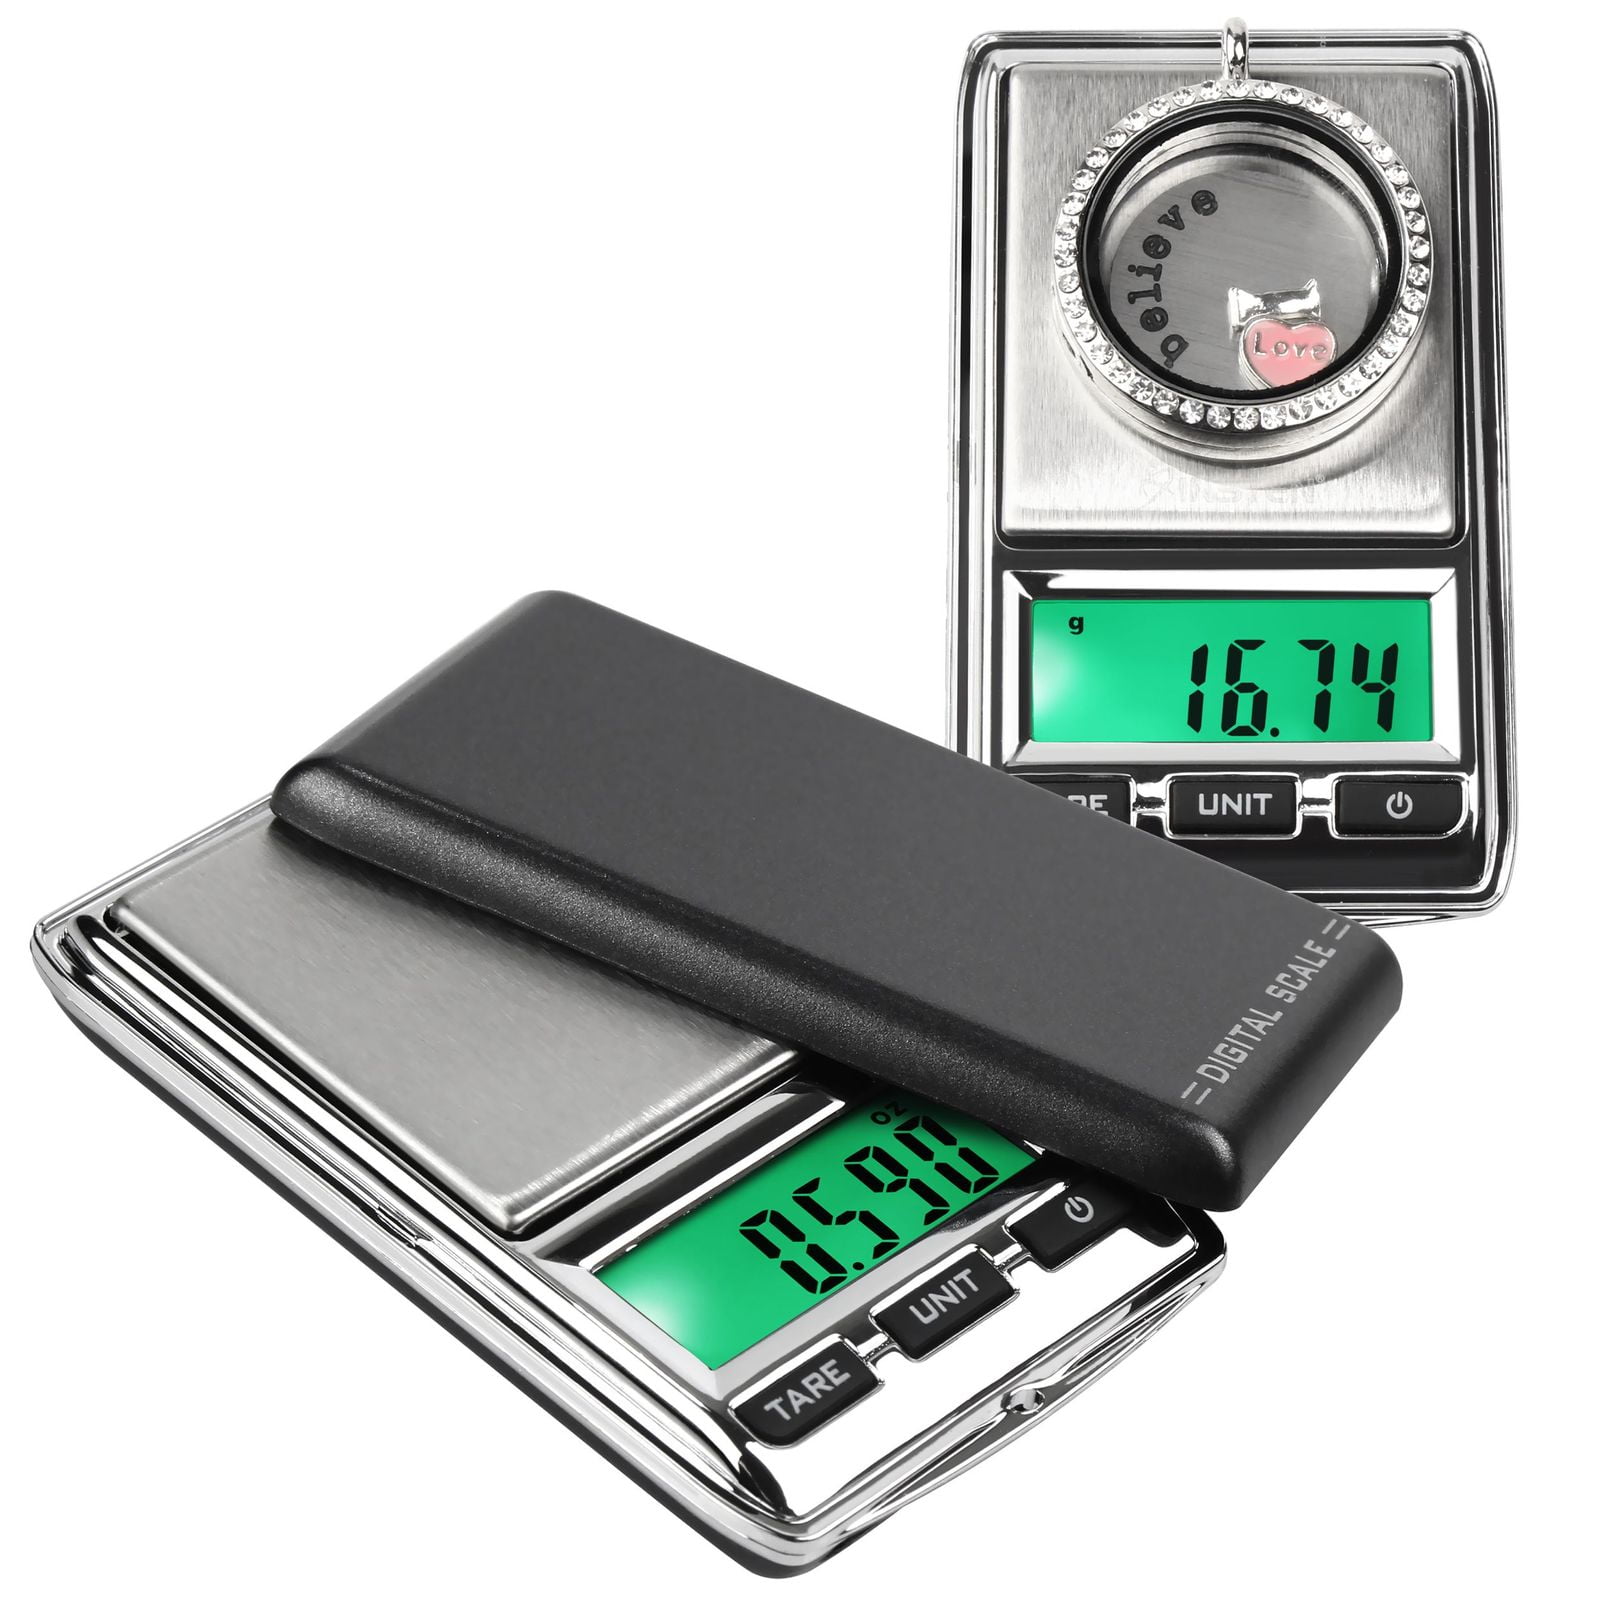  Smart Weigh Digital Pro Pocket Scale 500g x 0.01 grams,Jewelry  Scale, Coffee Scale, Food Scale with Tare, Hold and PCS function, 2 Lids  Included, Back-Lit LCD Display: Home & Kitchen